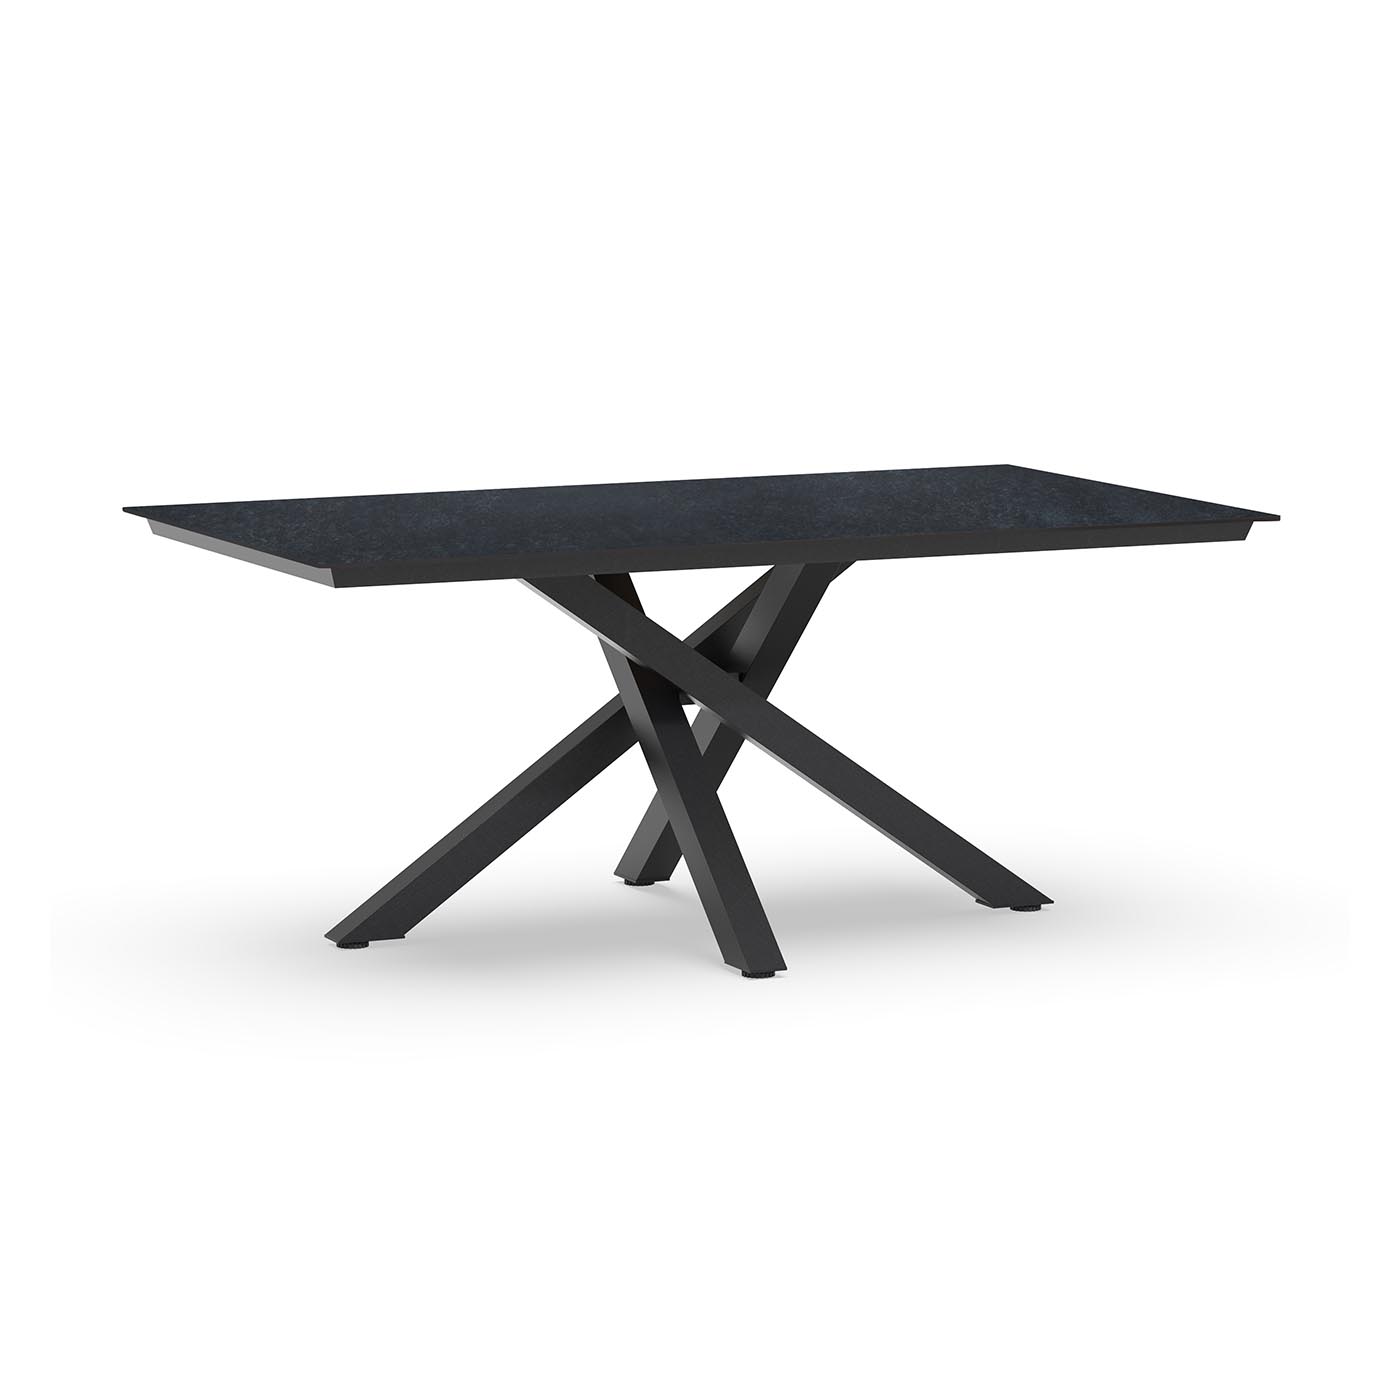 Orion Dining Table Trespa Graphite 180 x 100 cm Charcoal